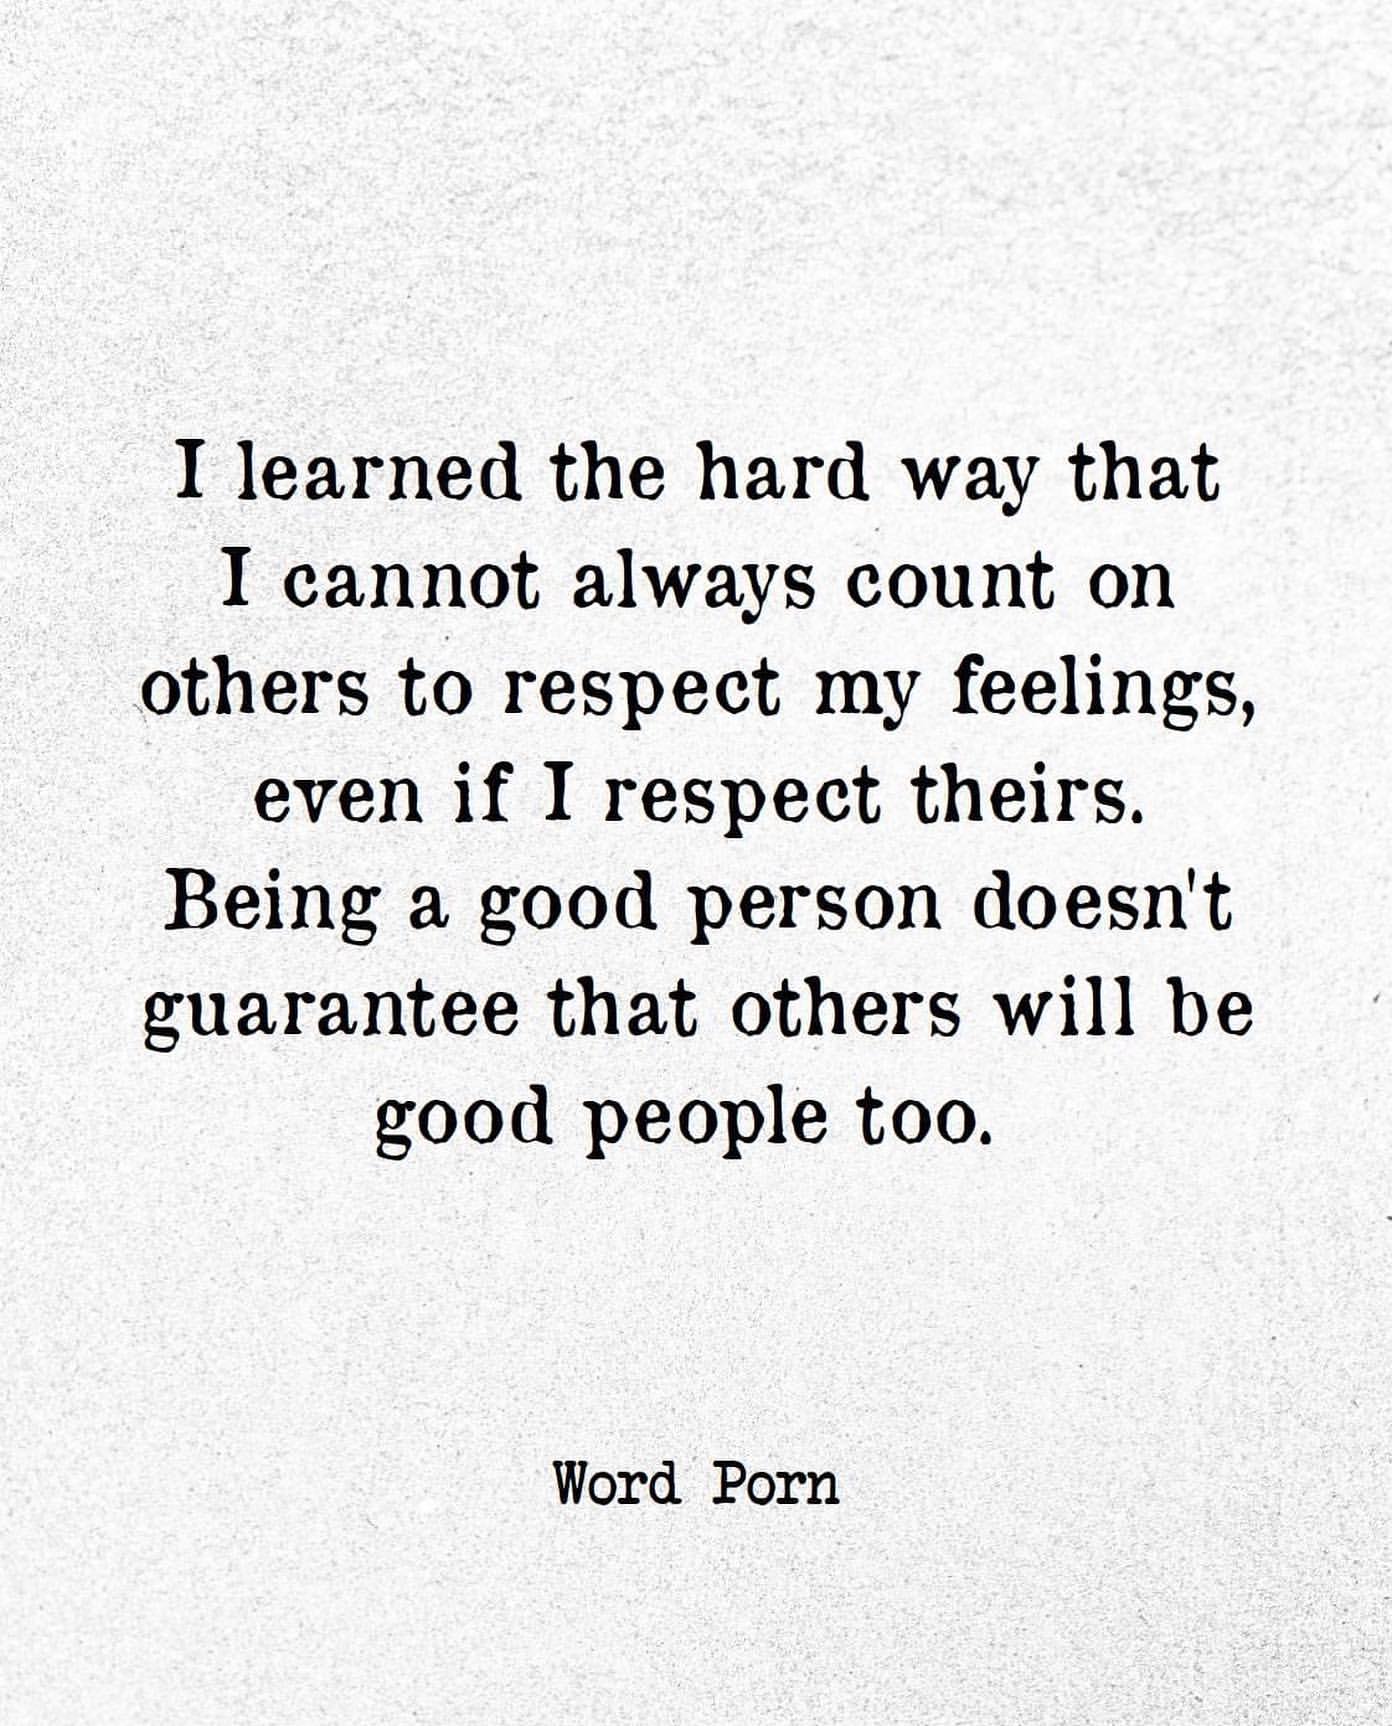 I learned the hard way that I cannot always count on others to respect my feelings, even if I respect theirs. Being a good person doesn't guarantee that others will be good people too.